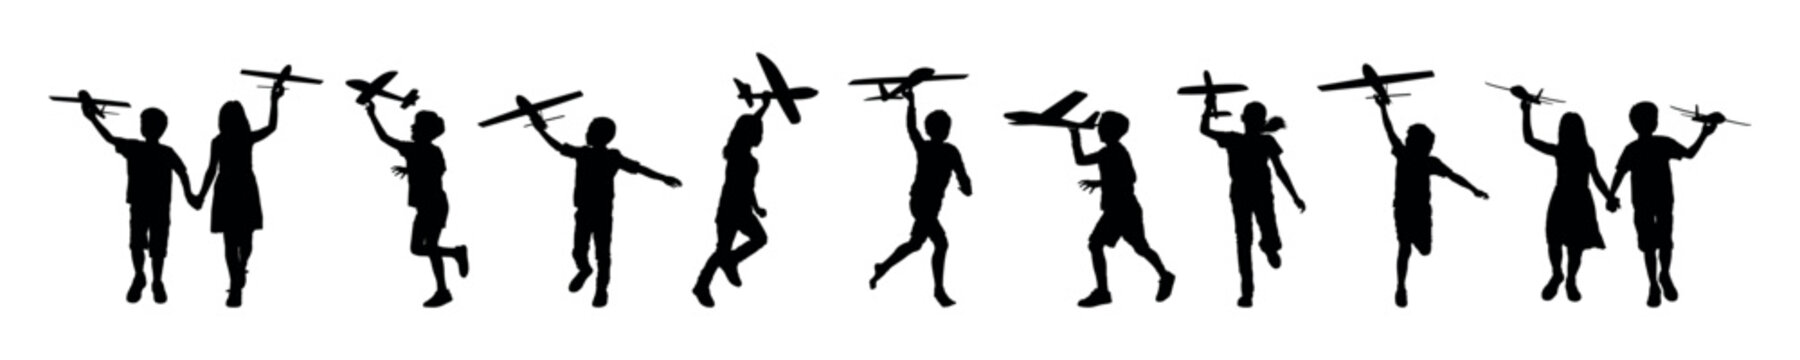 Group of kids playing toy airplane silhouette set collection. Children holding airplane toy silhouette collection.